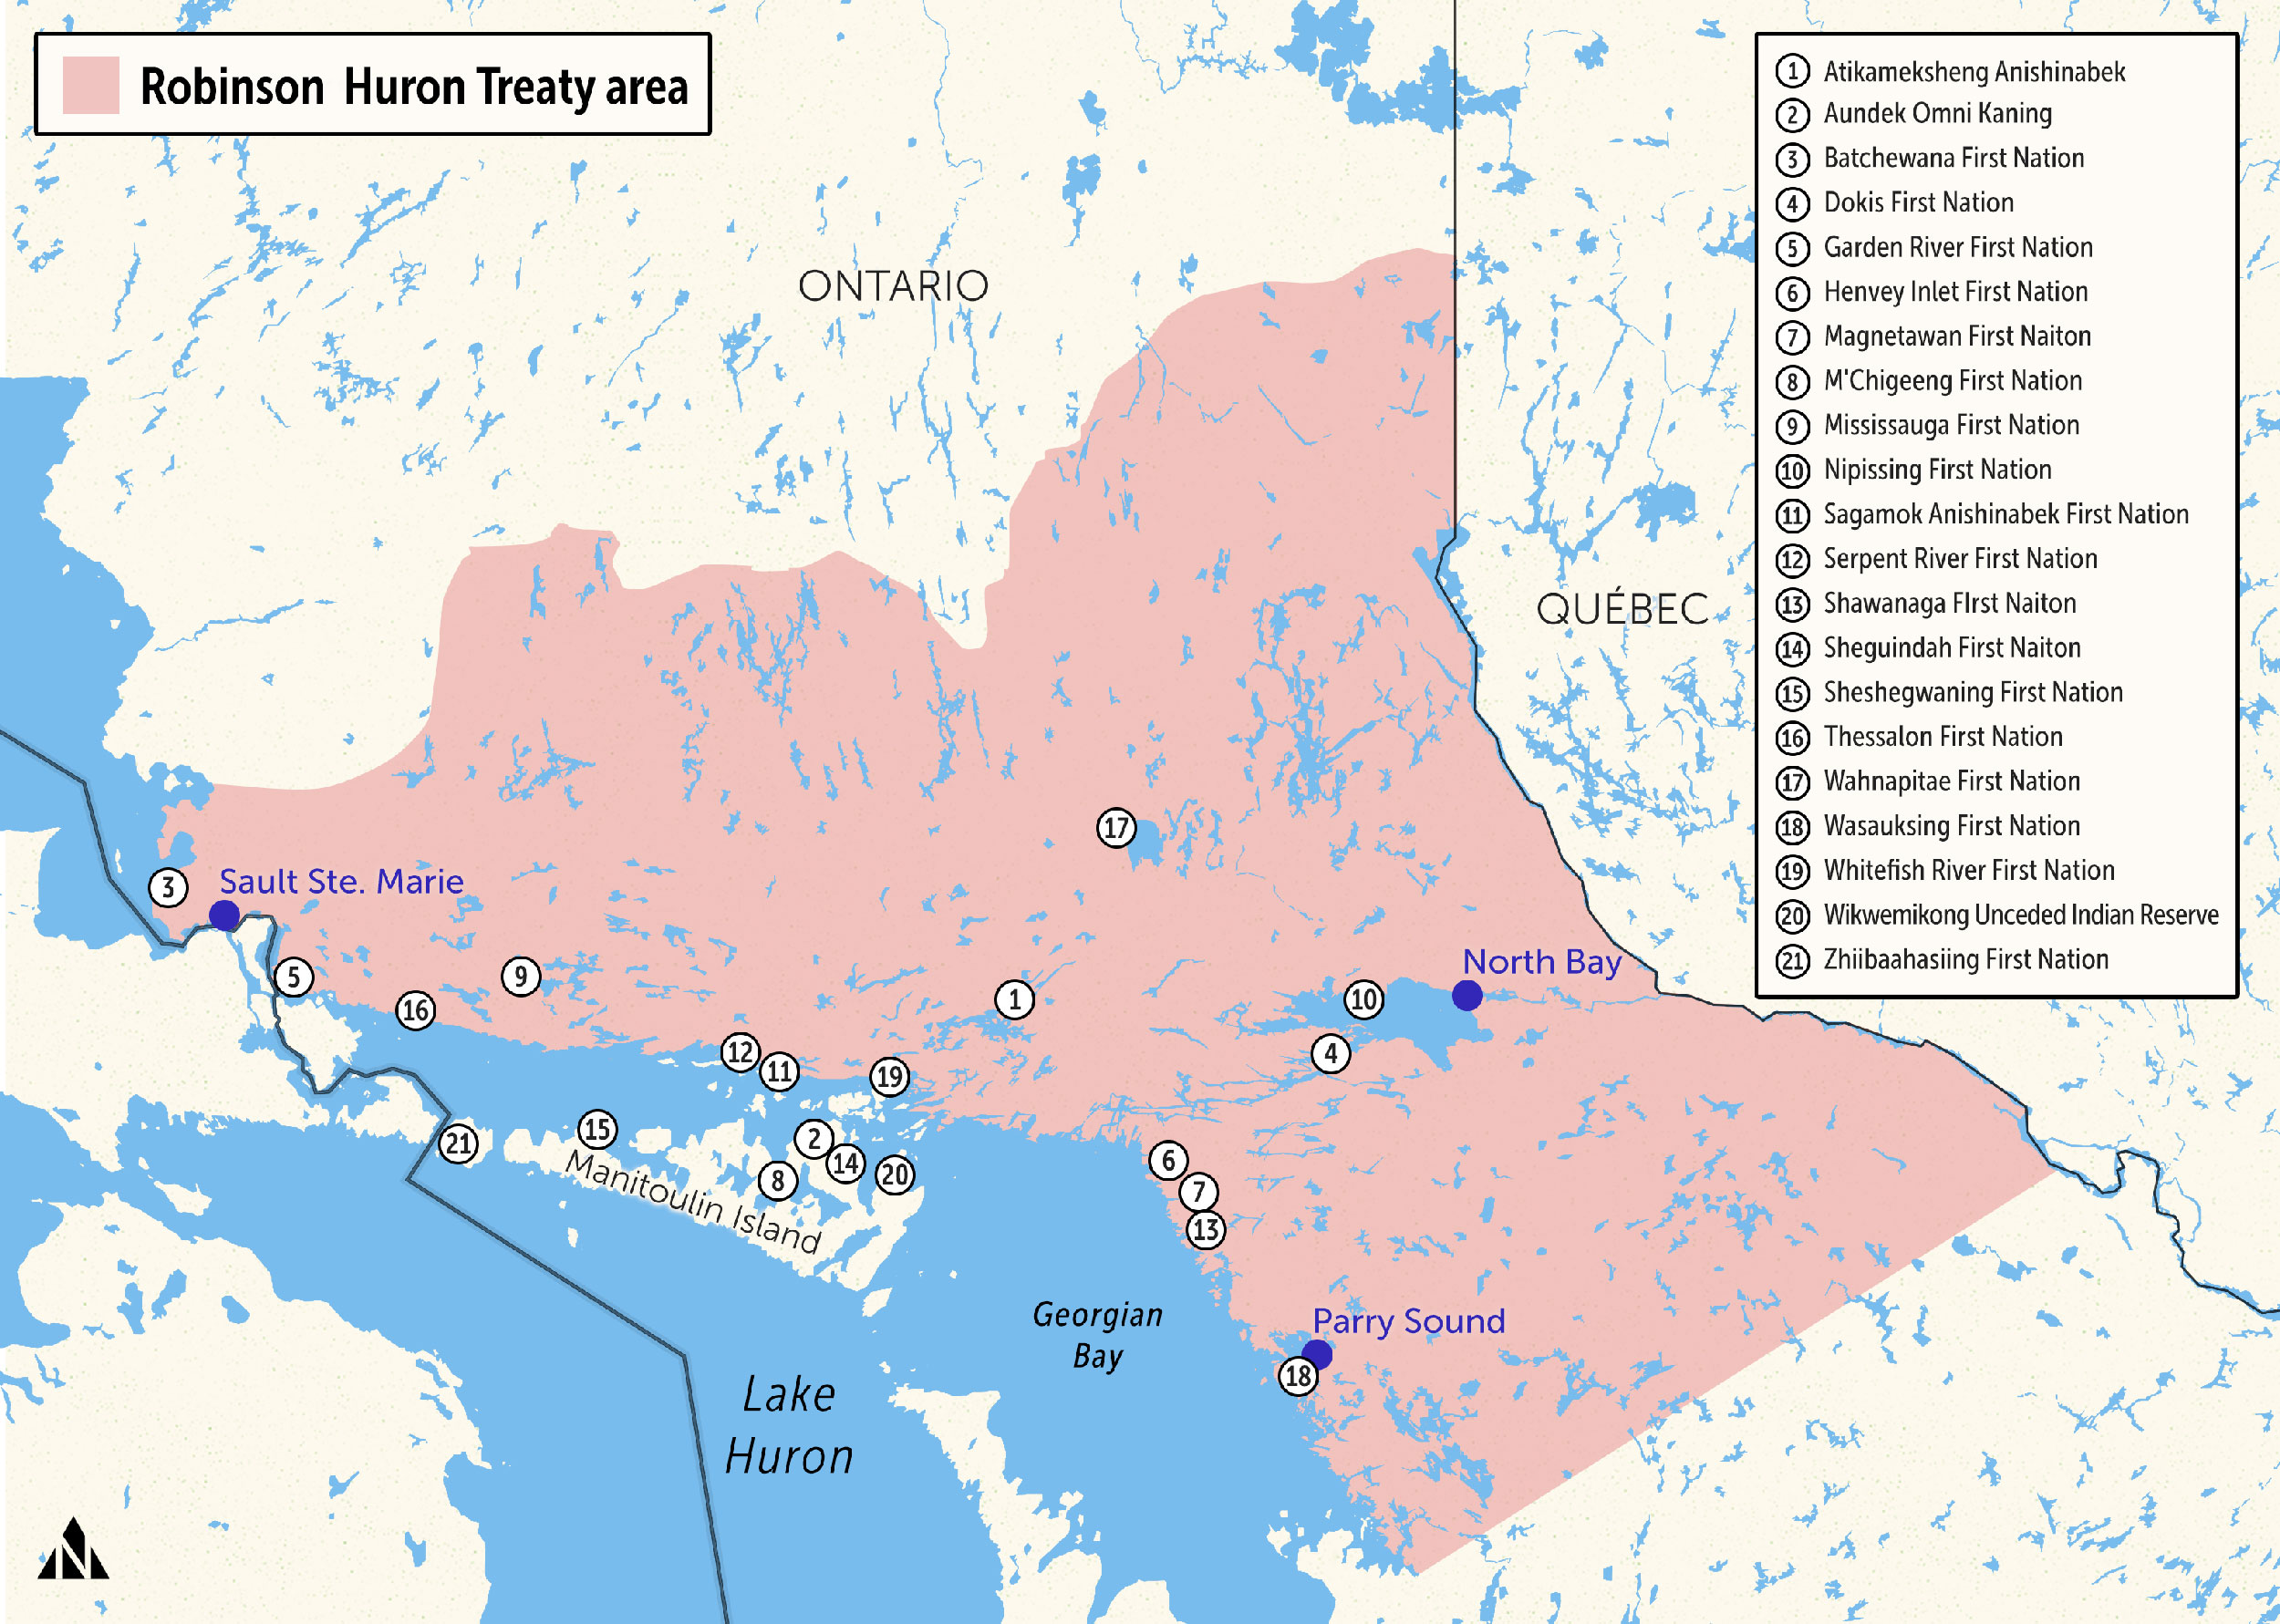 The Robinson Huron Treaty area stretches from Parry Sound to Sudbury, and North Bay to Sault Ste Marie along the shores of Lake Huron. First Nations signatories are asking courts to make the provincial and federal government honour a unique note in the treaty that said annual payments would increase alongside resource extraction revenues.